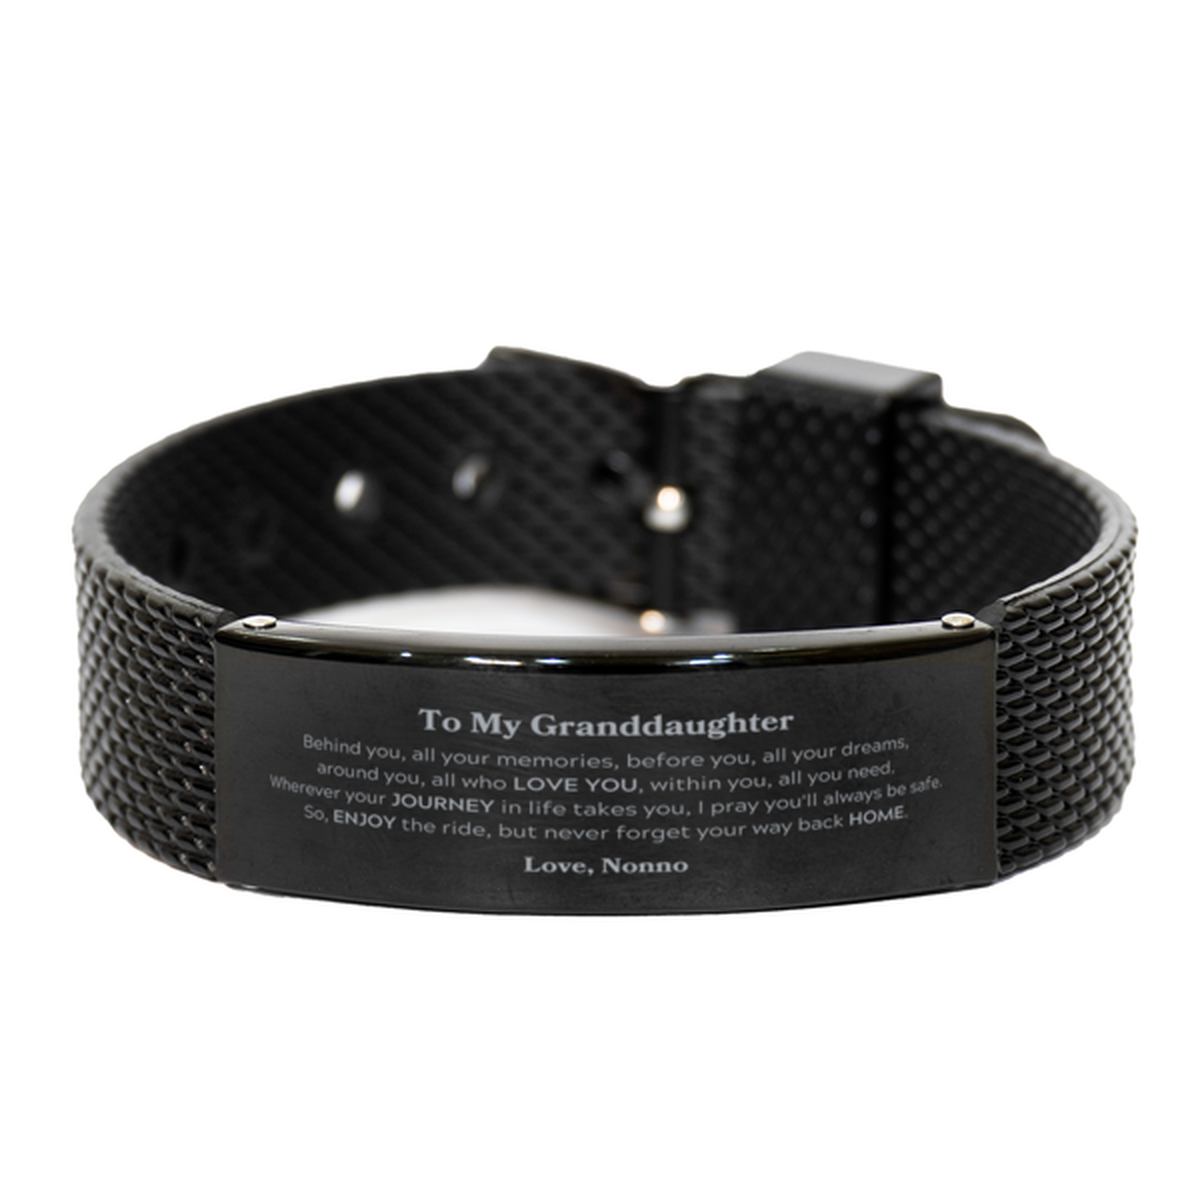 To My Granddaughter Graduation Gifts from Nonno, Granddaughter Black Shark Mesh Bracelet Christmas Birthday Gifts for Granddaughter Behind you, all your memories, before you, all your dreams. Love, Nonno